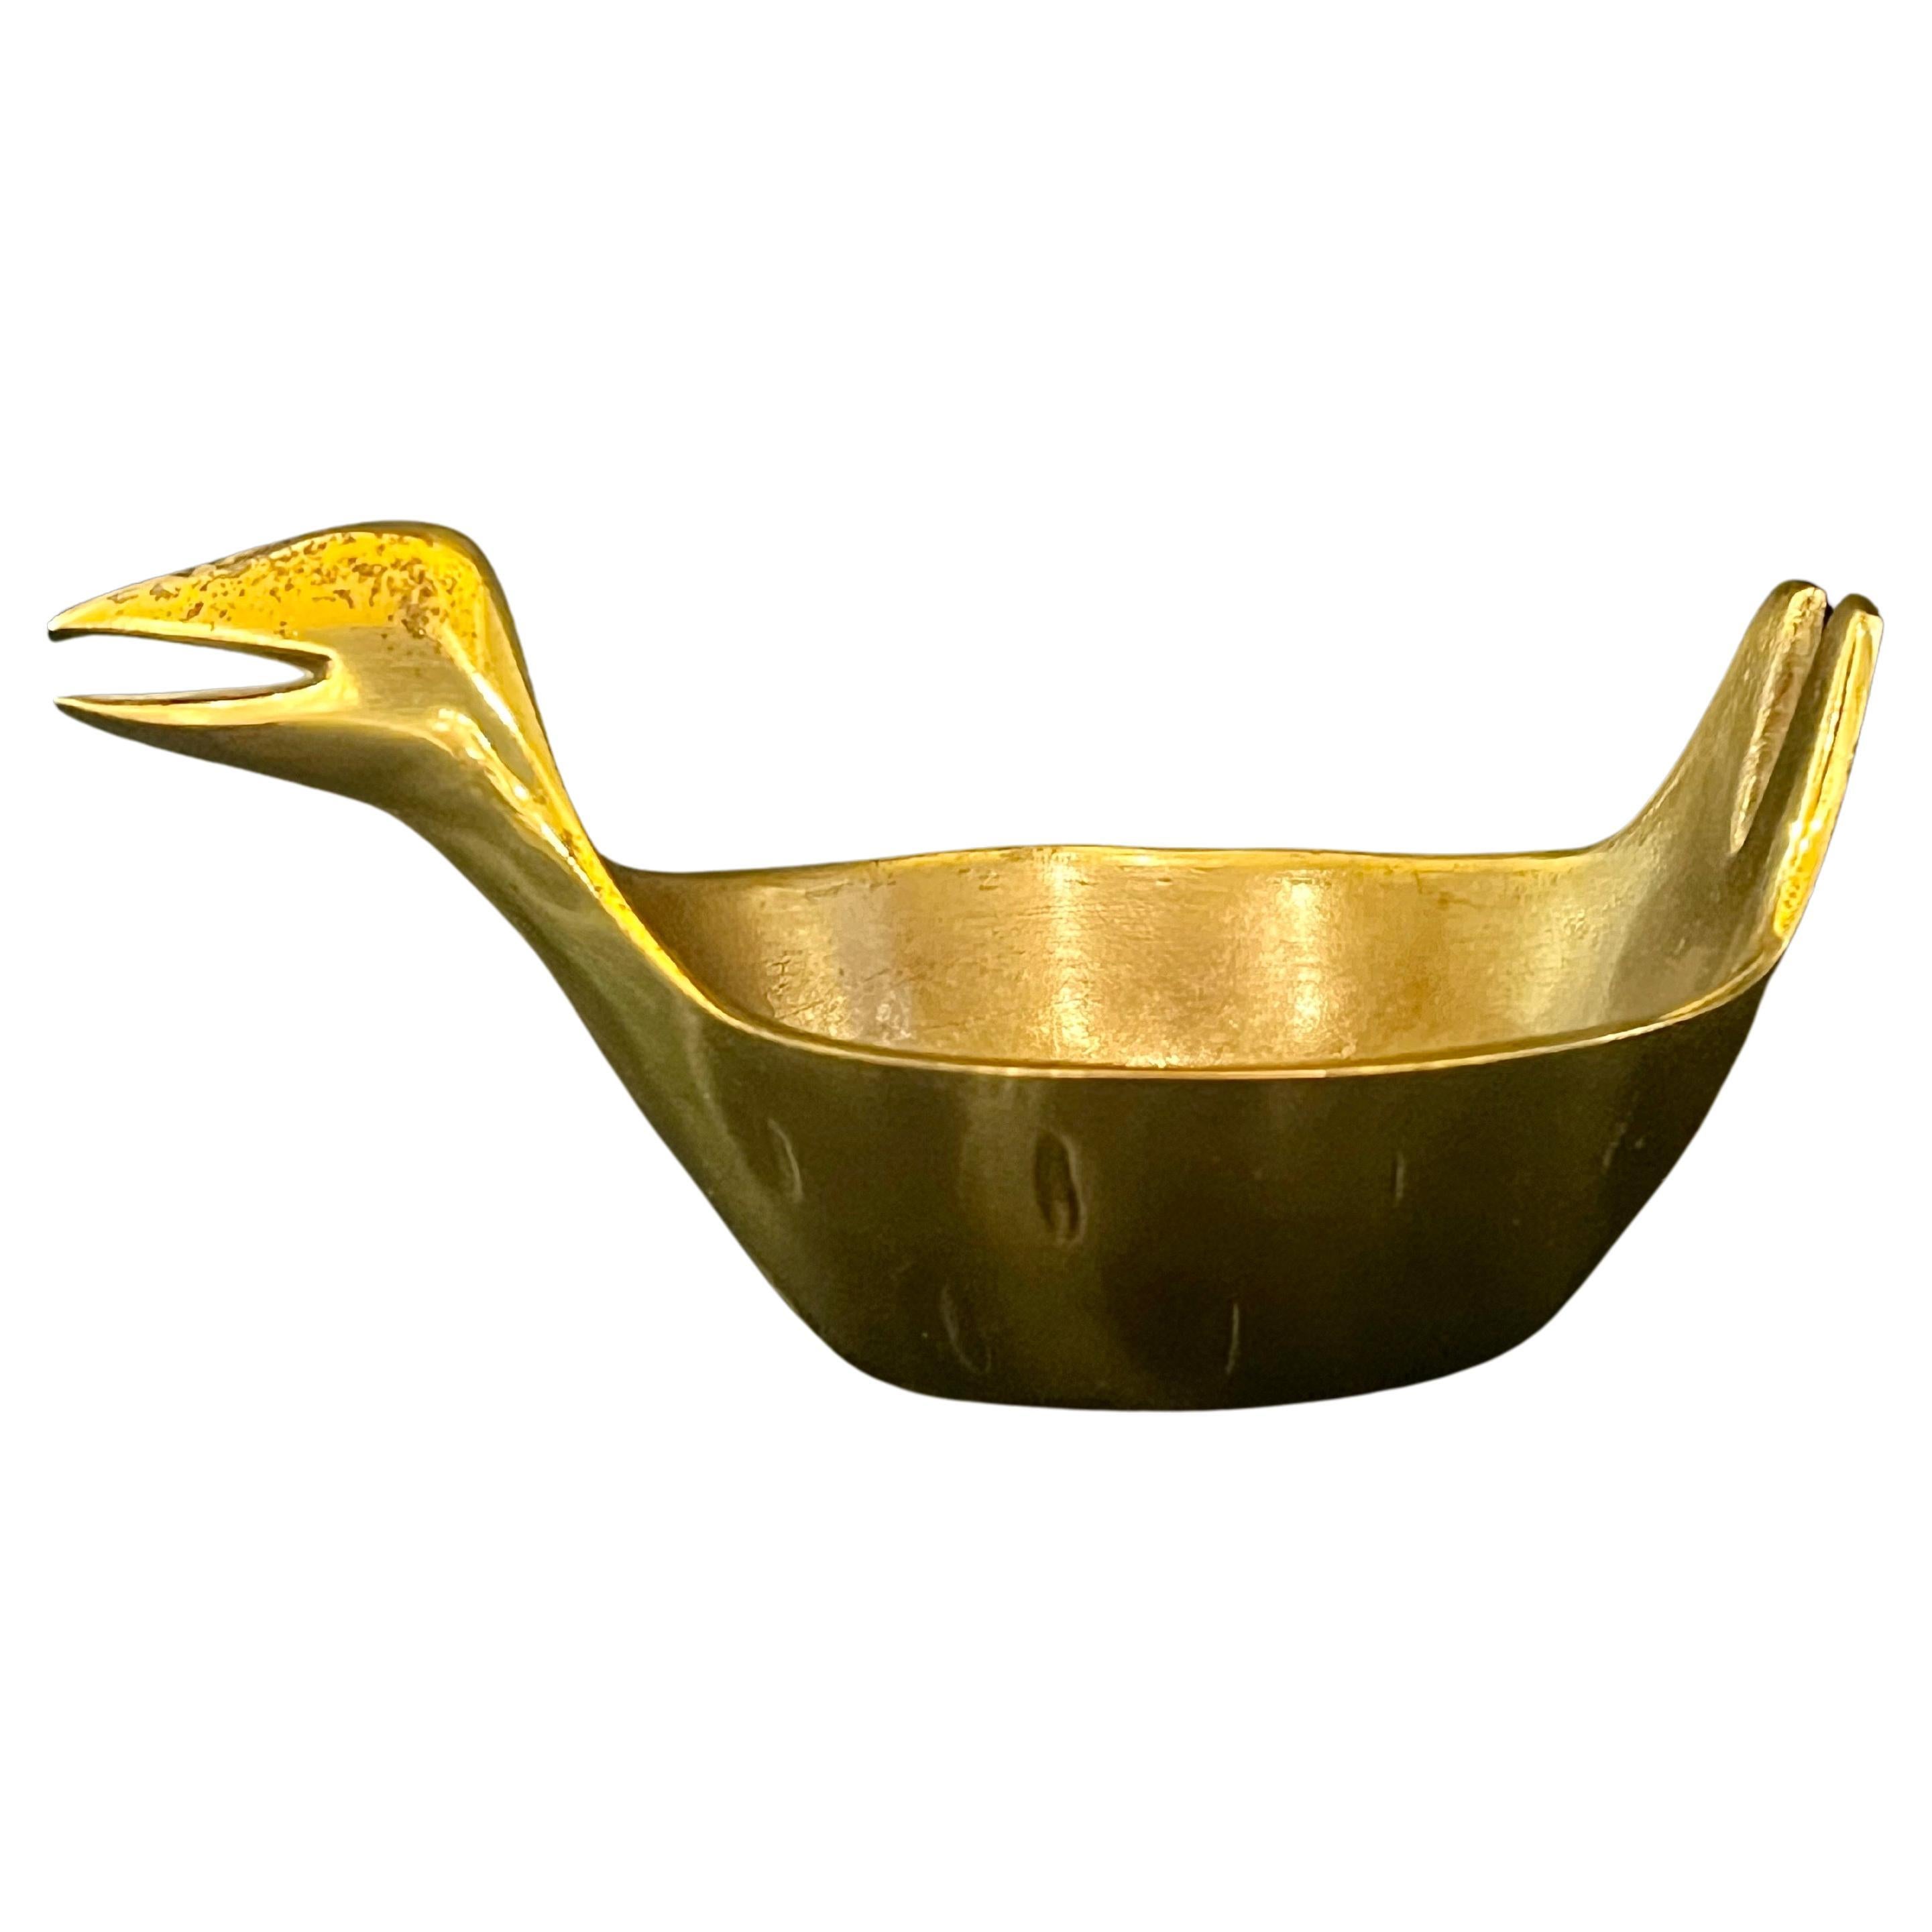 Whimsical patinated sold brass bird ashtray circa 1950's great piece original finish, can be used as catch it all.a must for mid century Danish modern home decor.